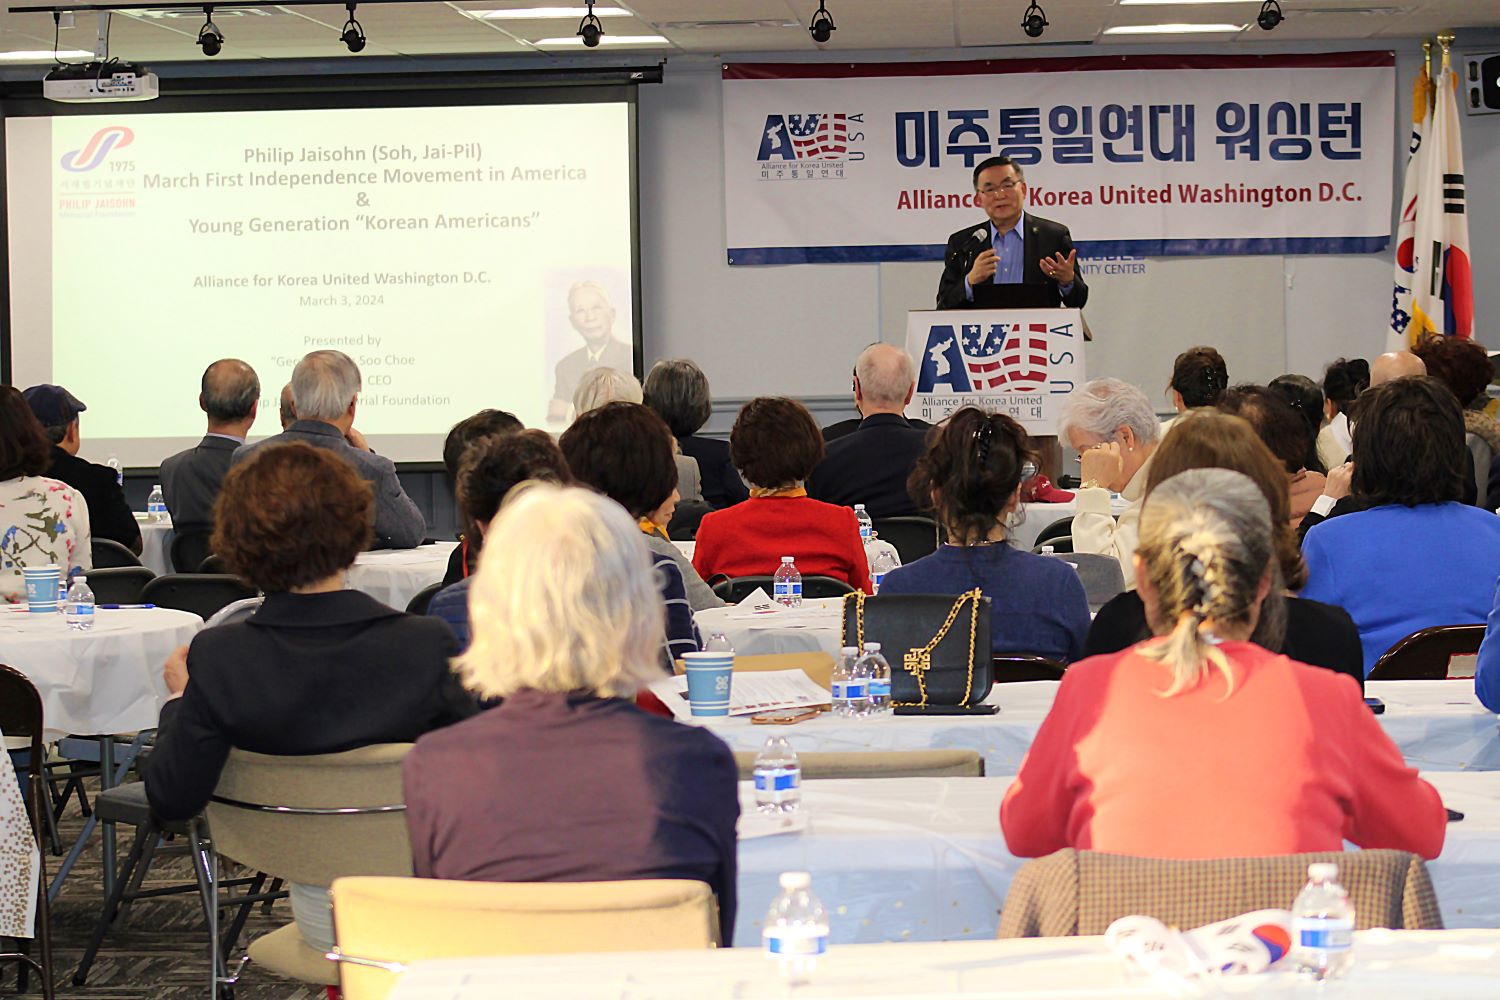 Speaker addressing an audience at a Korean American community event commemorating the March 1 Movement.